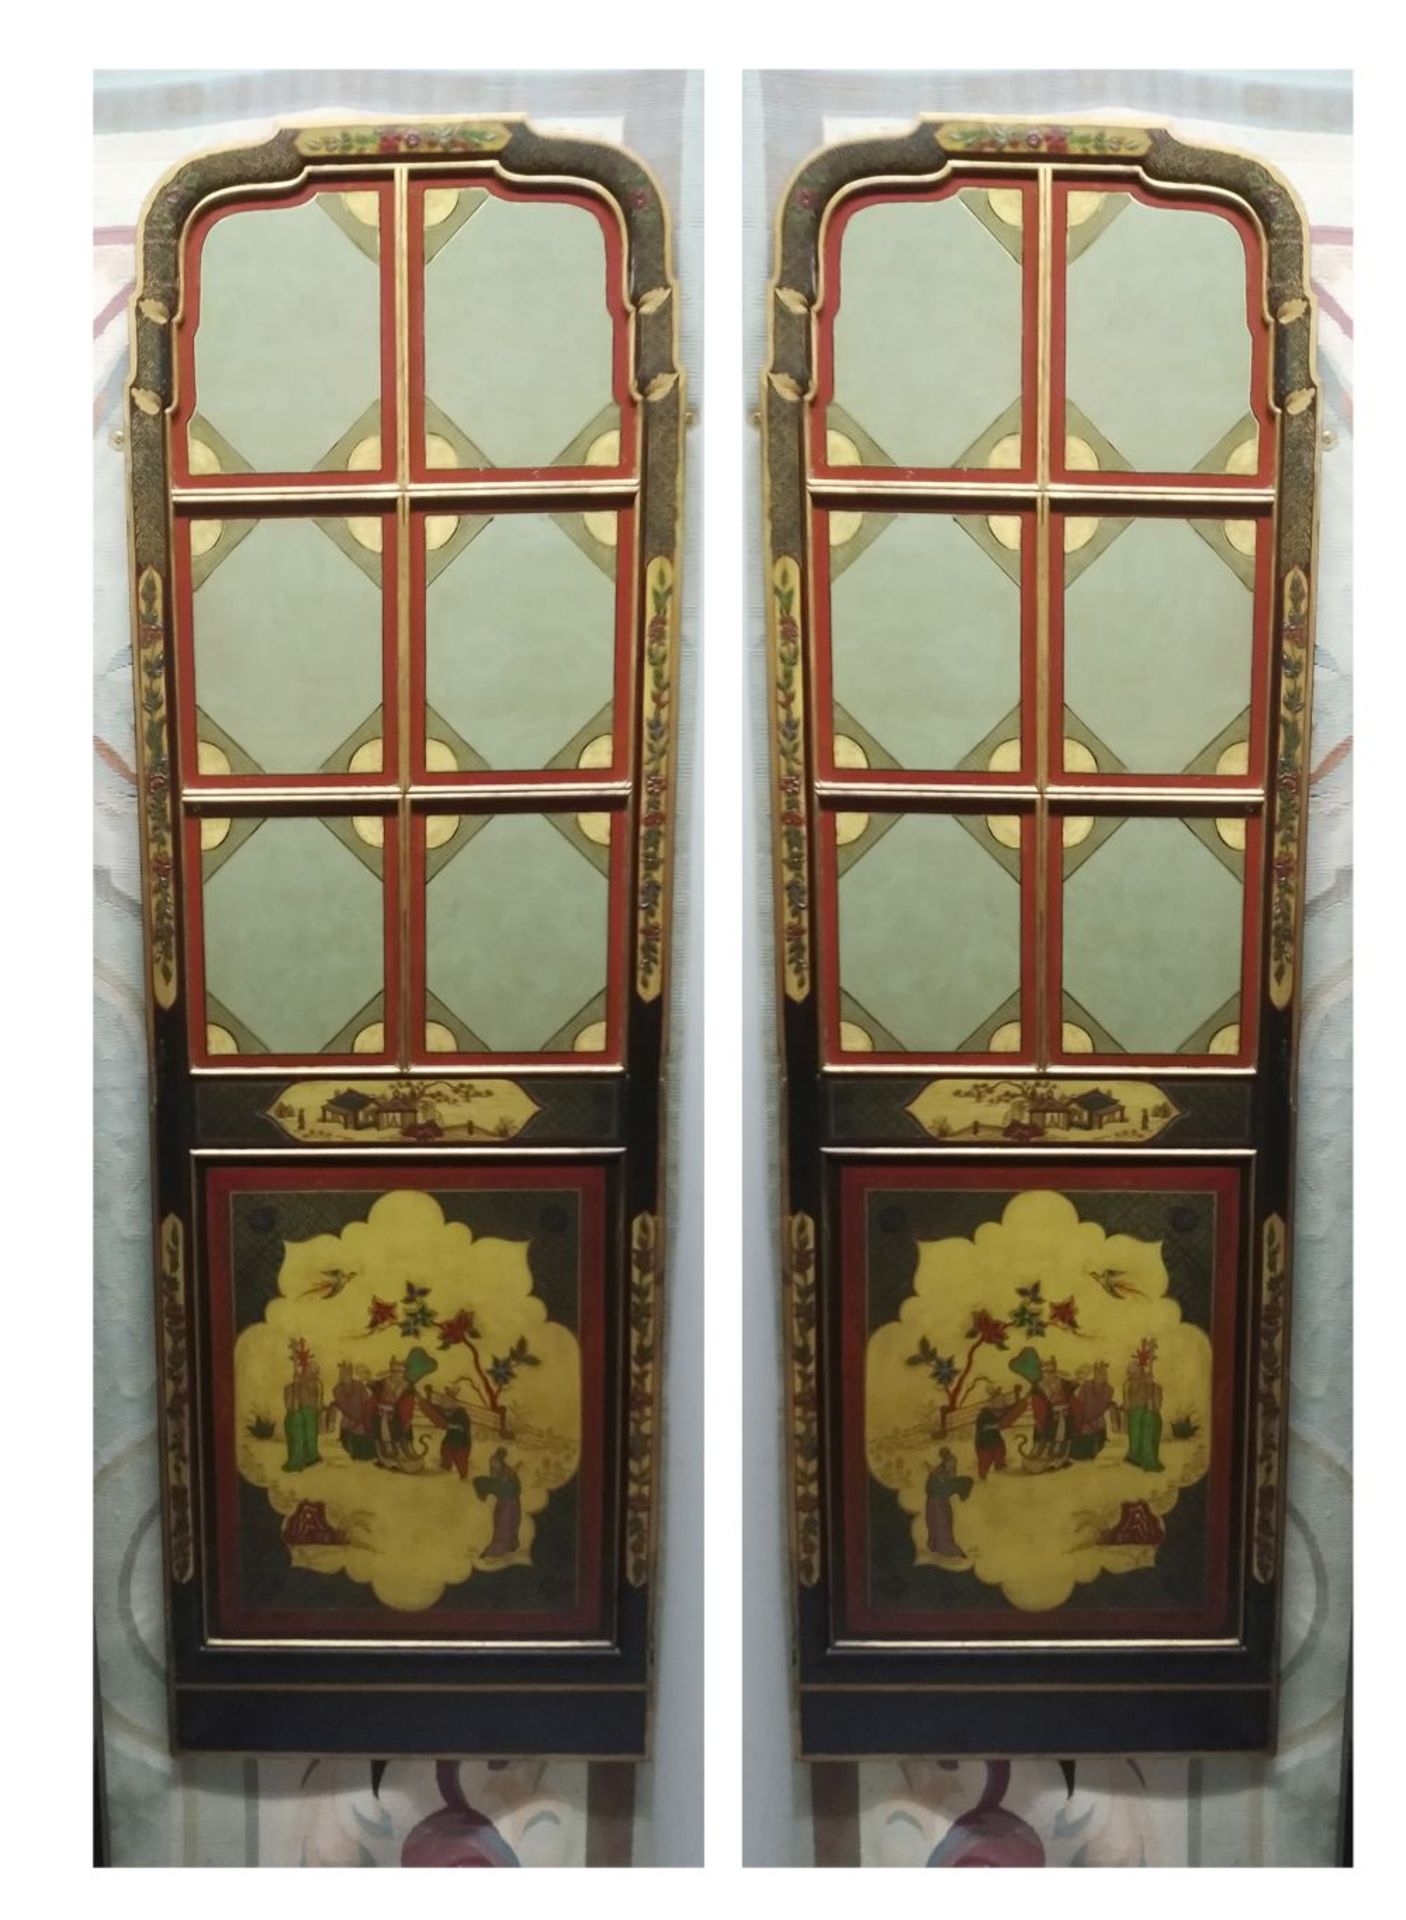 PAIR OF 19TH-CENTURY LACQUERED PANELS